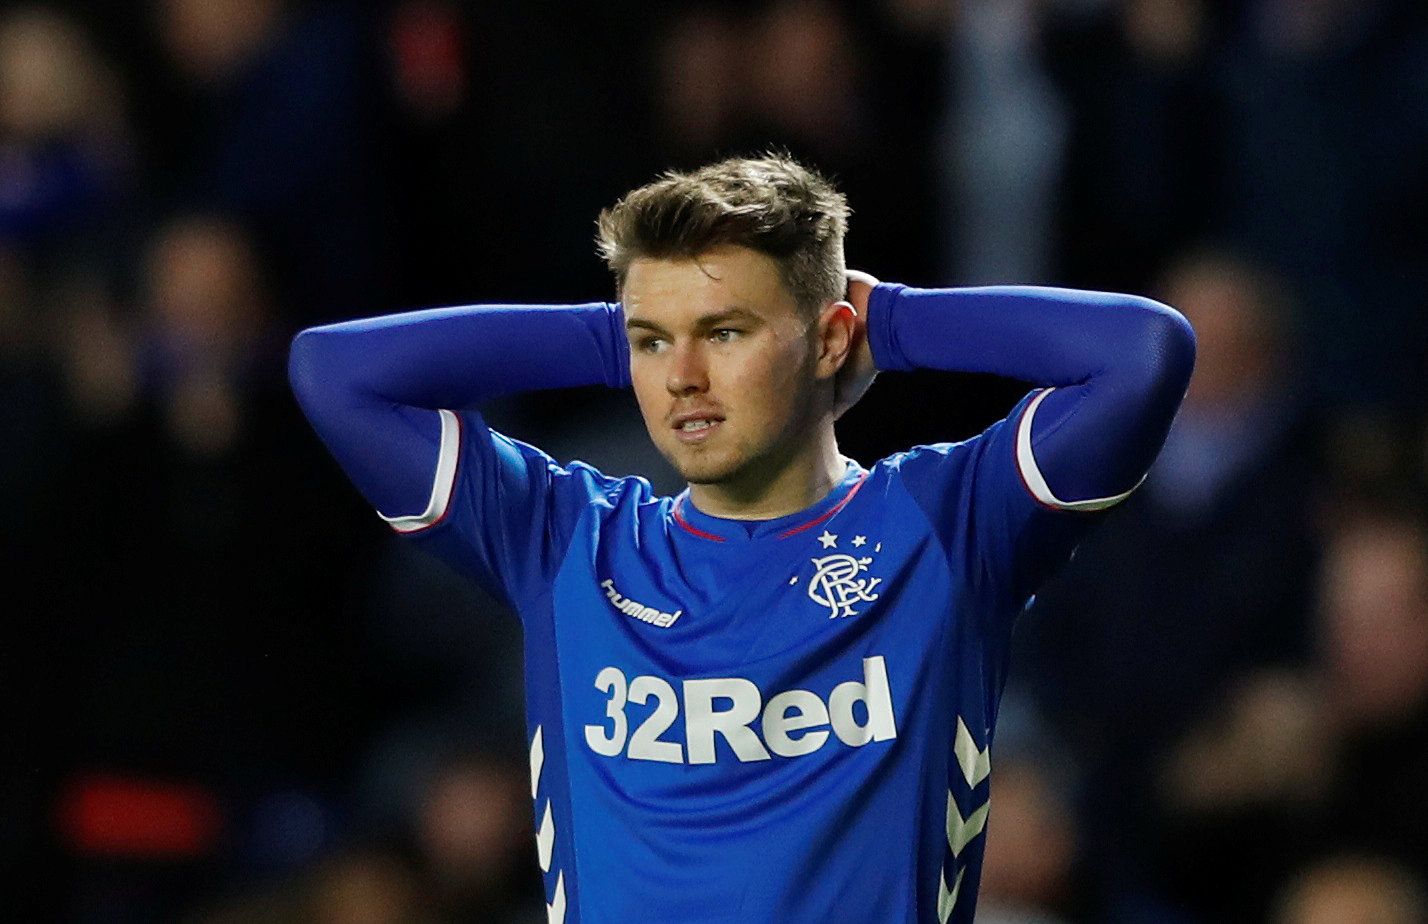 Soccer Football - Europa League - Group Stage - Group G - Rangers v Spartak Moscow - Ibrox, Glasgow, Britain - October 25, 2018  Rangers' Glenn Middleton looks dejected after the match   Action Images via Reuters/Lee Smith